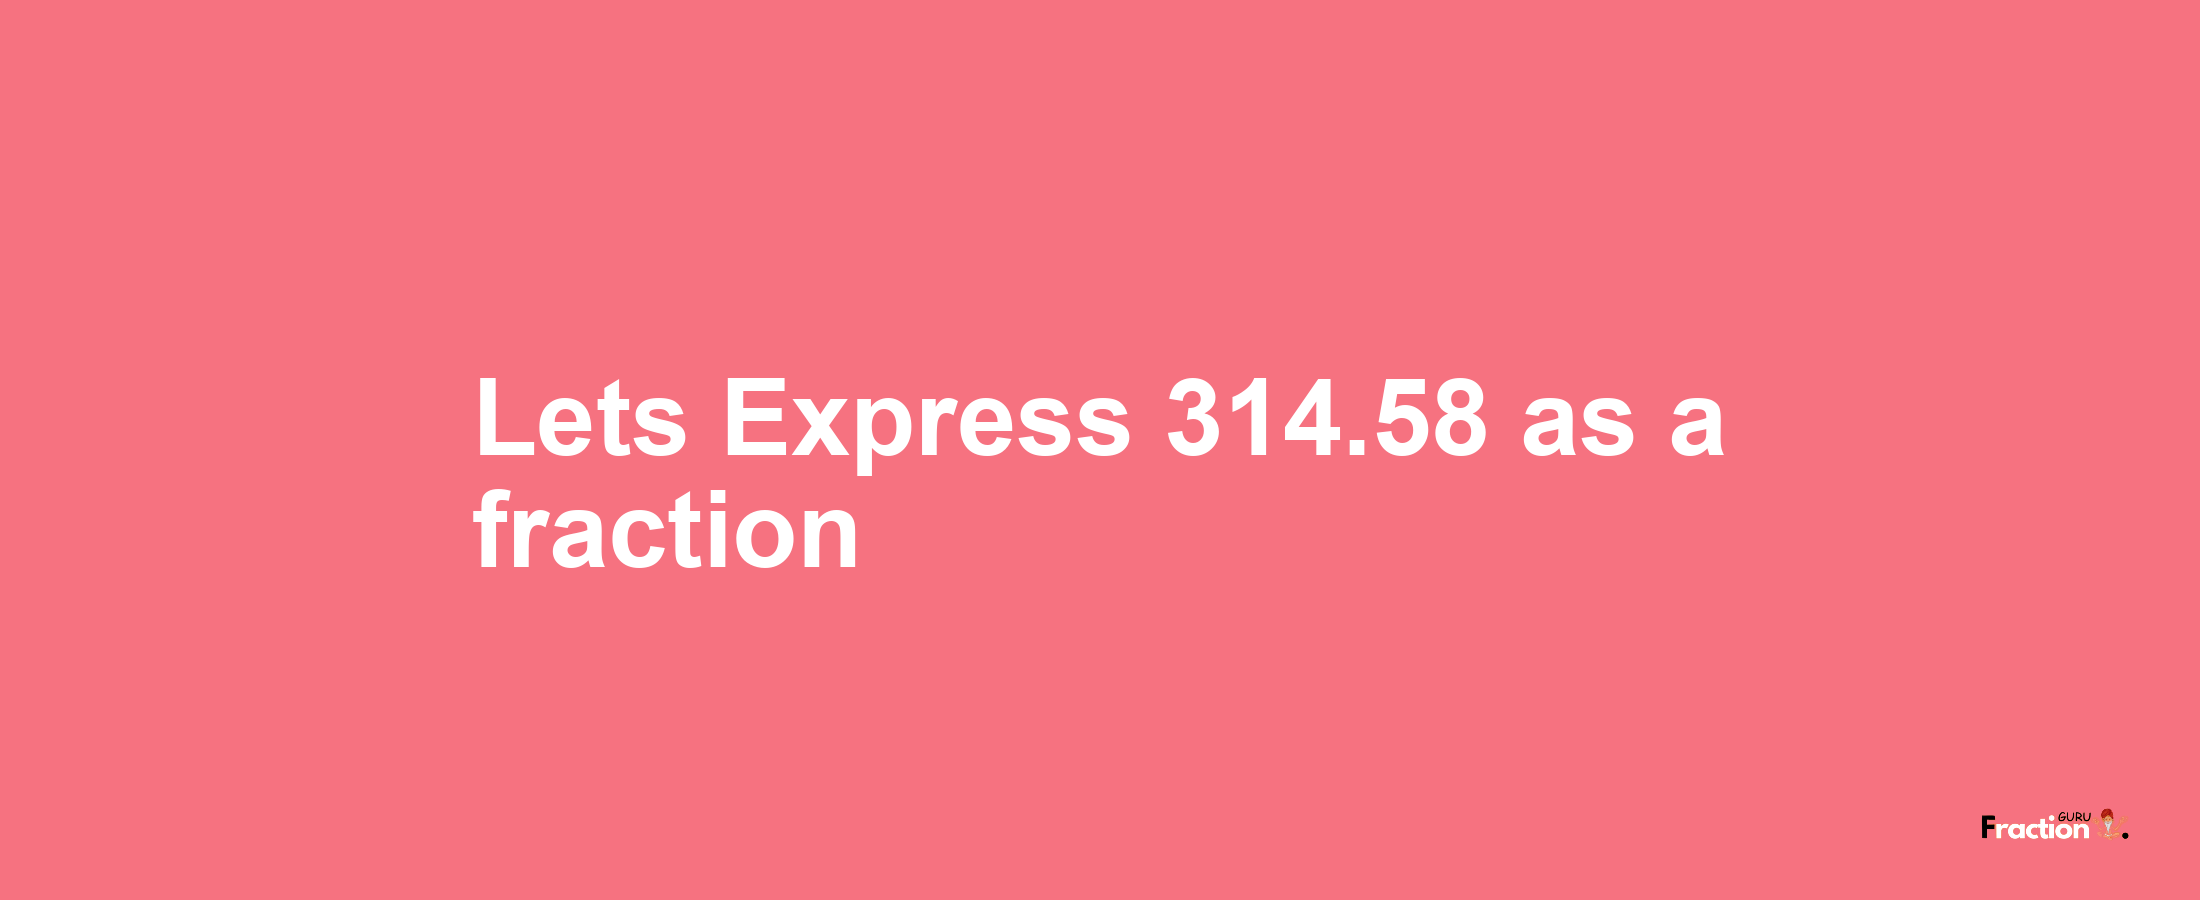 Lets Express 314.58 as afraction